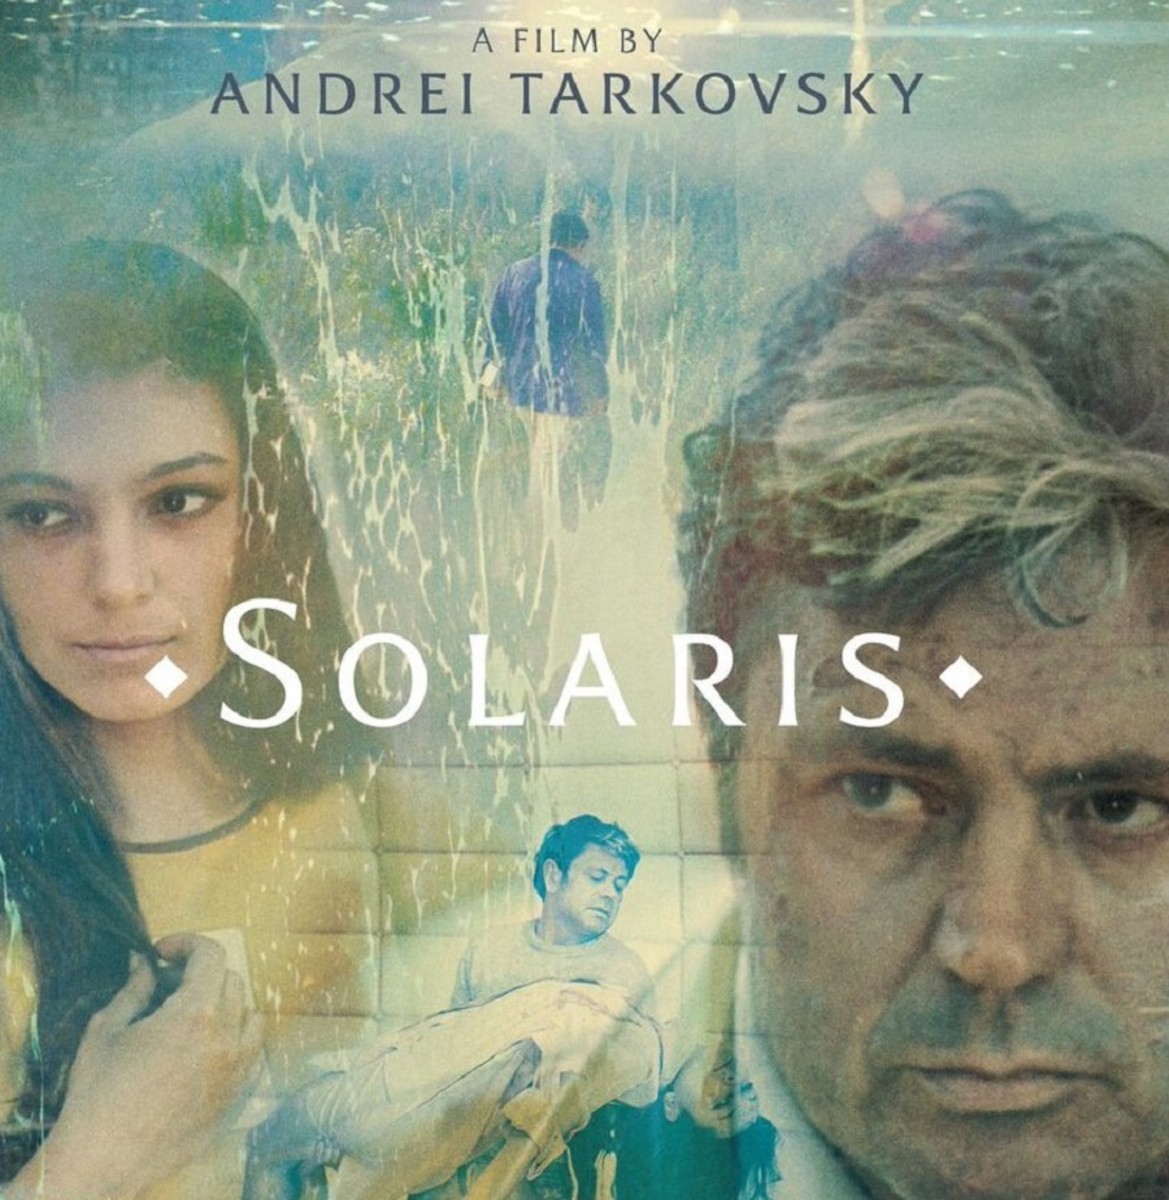 "Solaris"—a psychological space thriller.